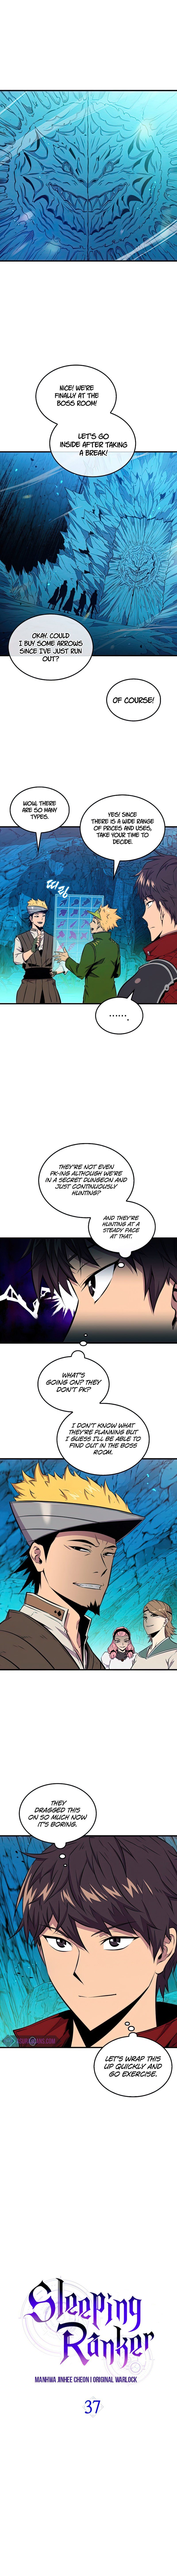 Sleeping Ranker Chapter 37 page 2